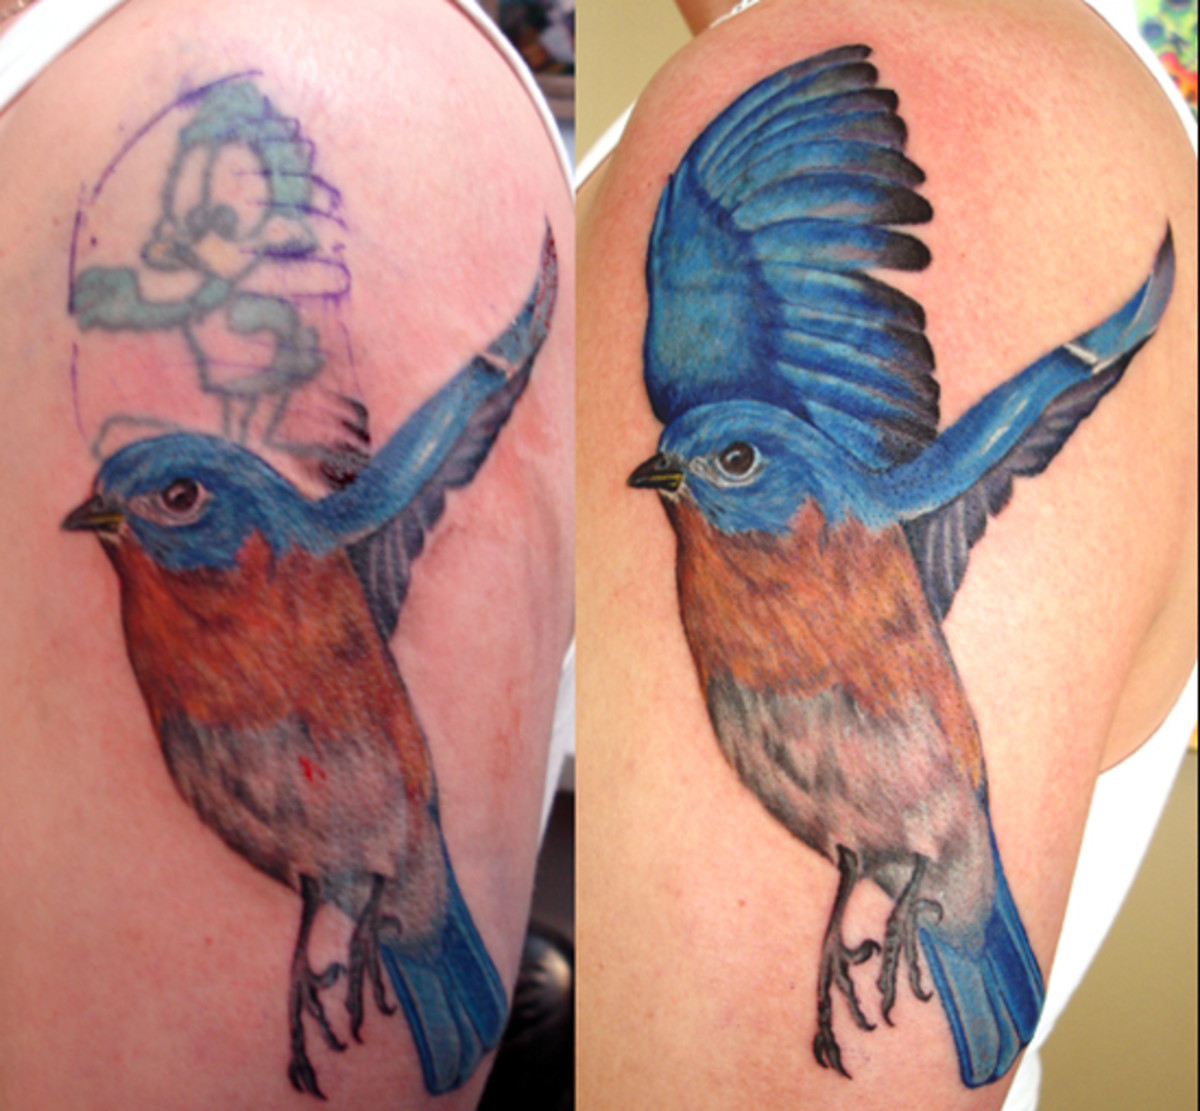 The bird's wing in a dark shade of blue has covered the old tattoo completely.